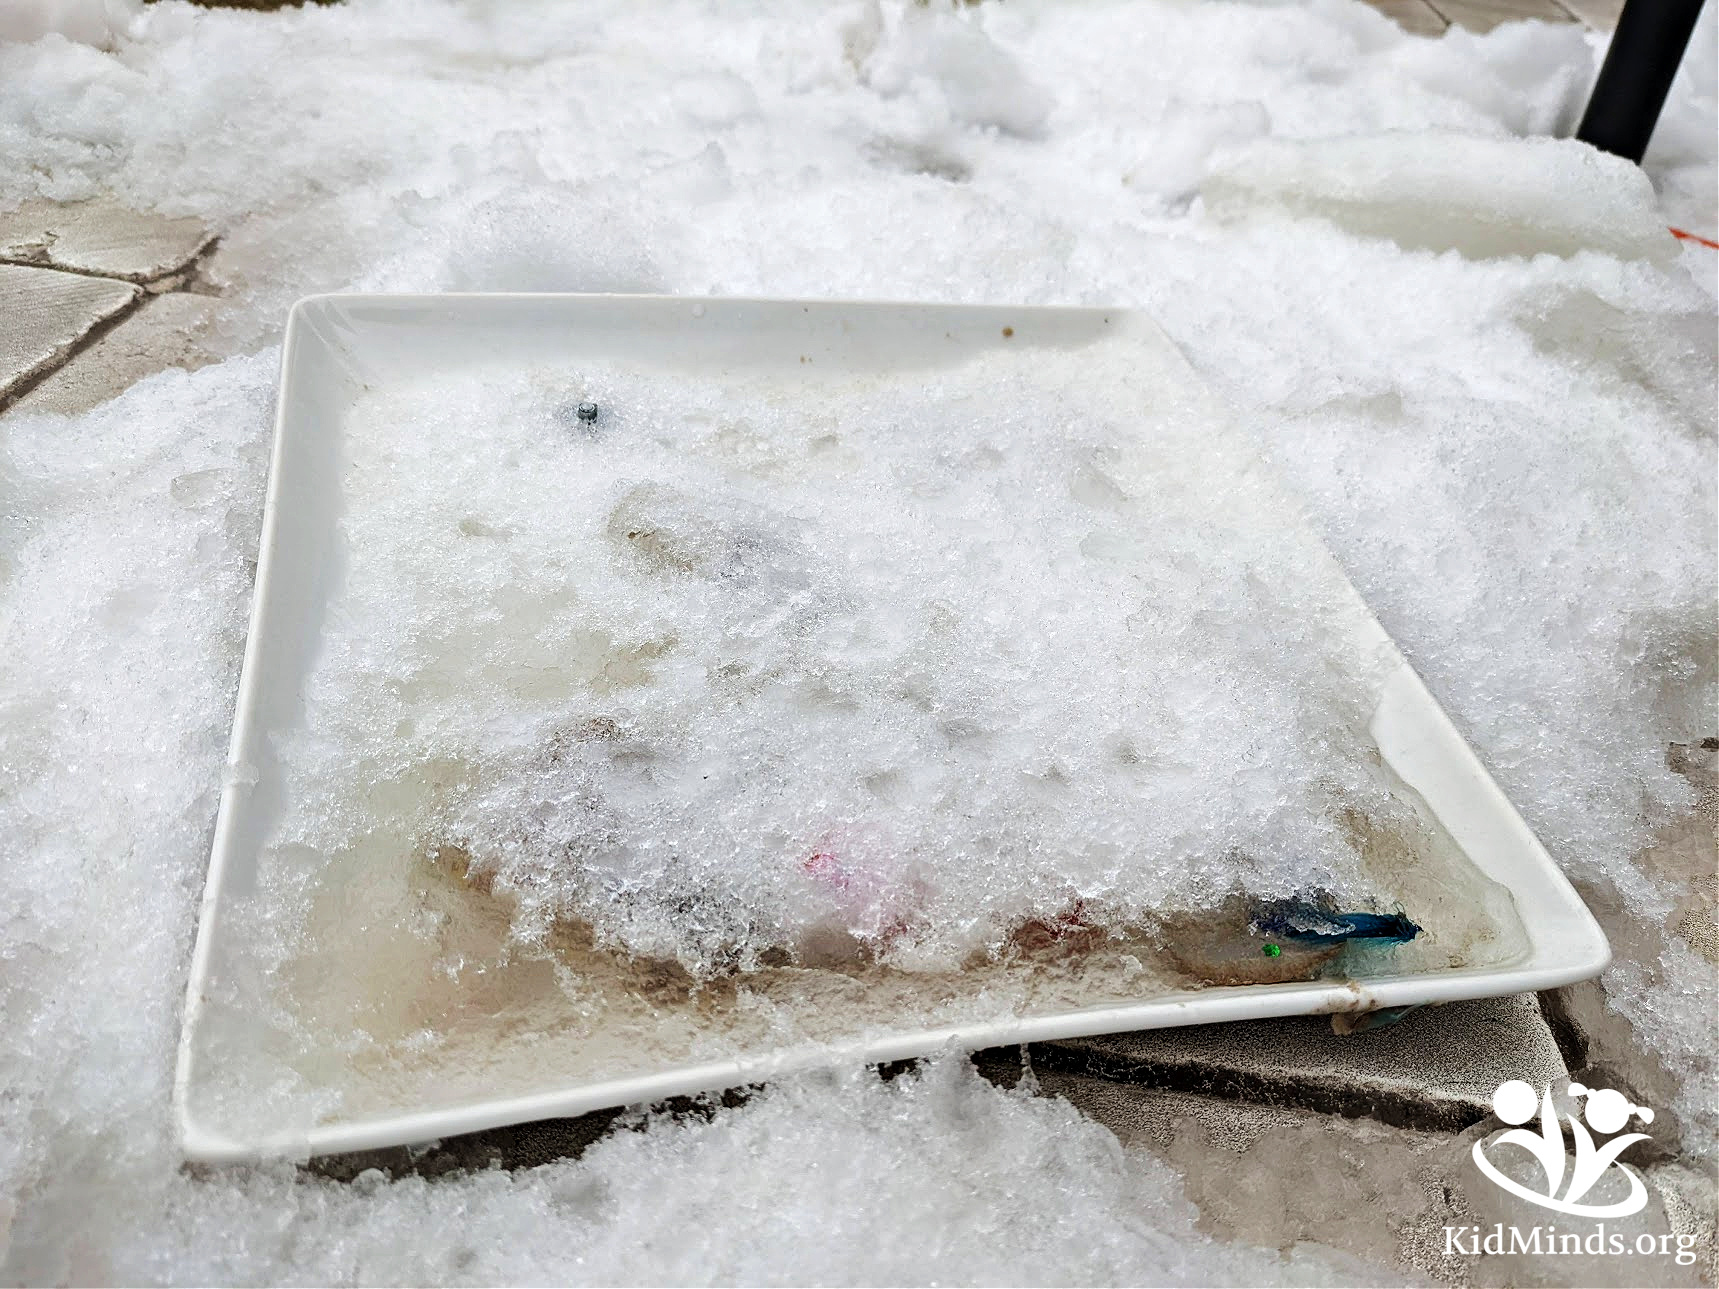 Fun Ice Archeology experiment to see what kinds of things preserve well in ice and what happens to them when they are defrosted. #kidsactivities #STEM #winteractivities #icescience